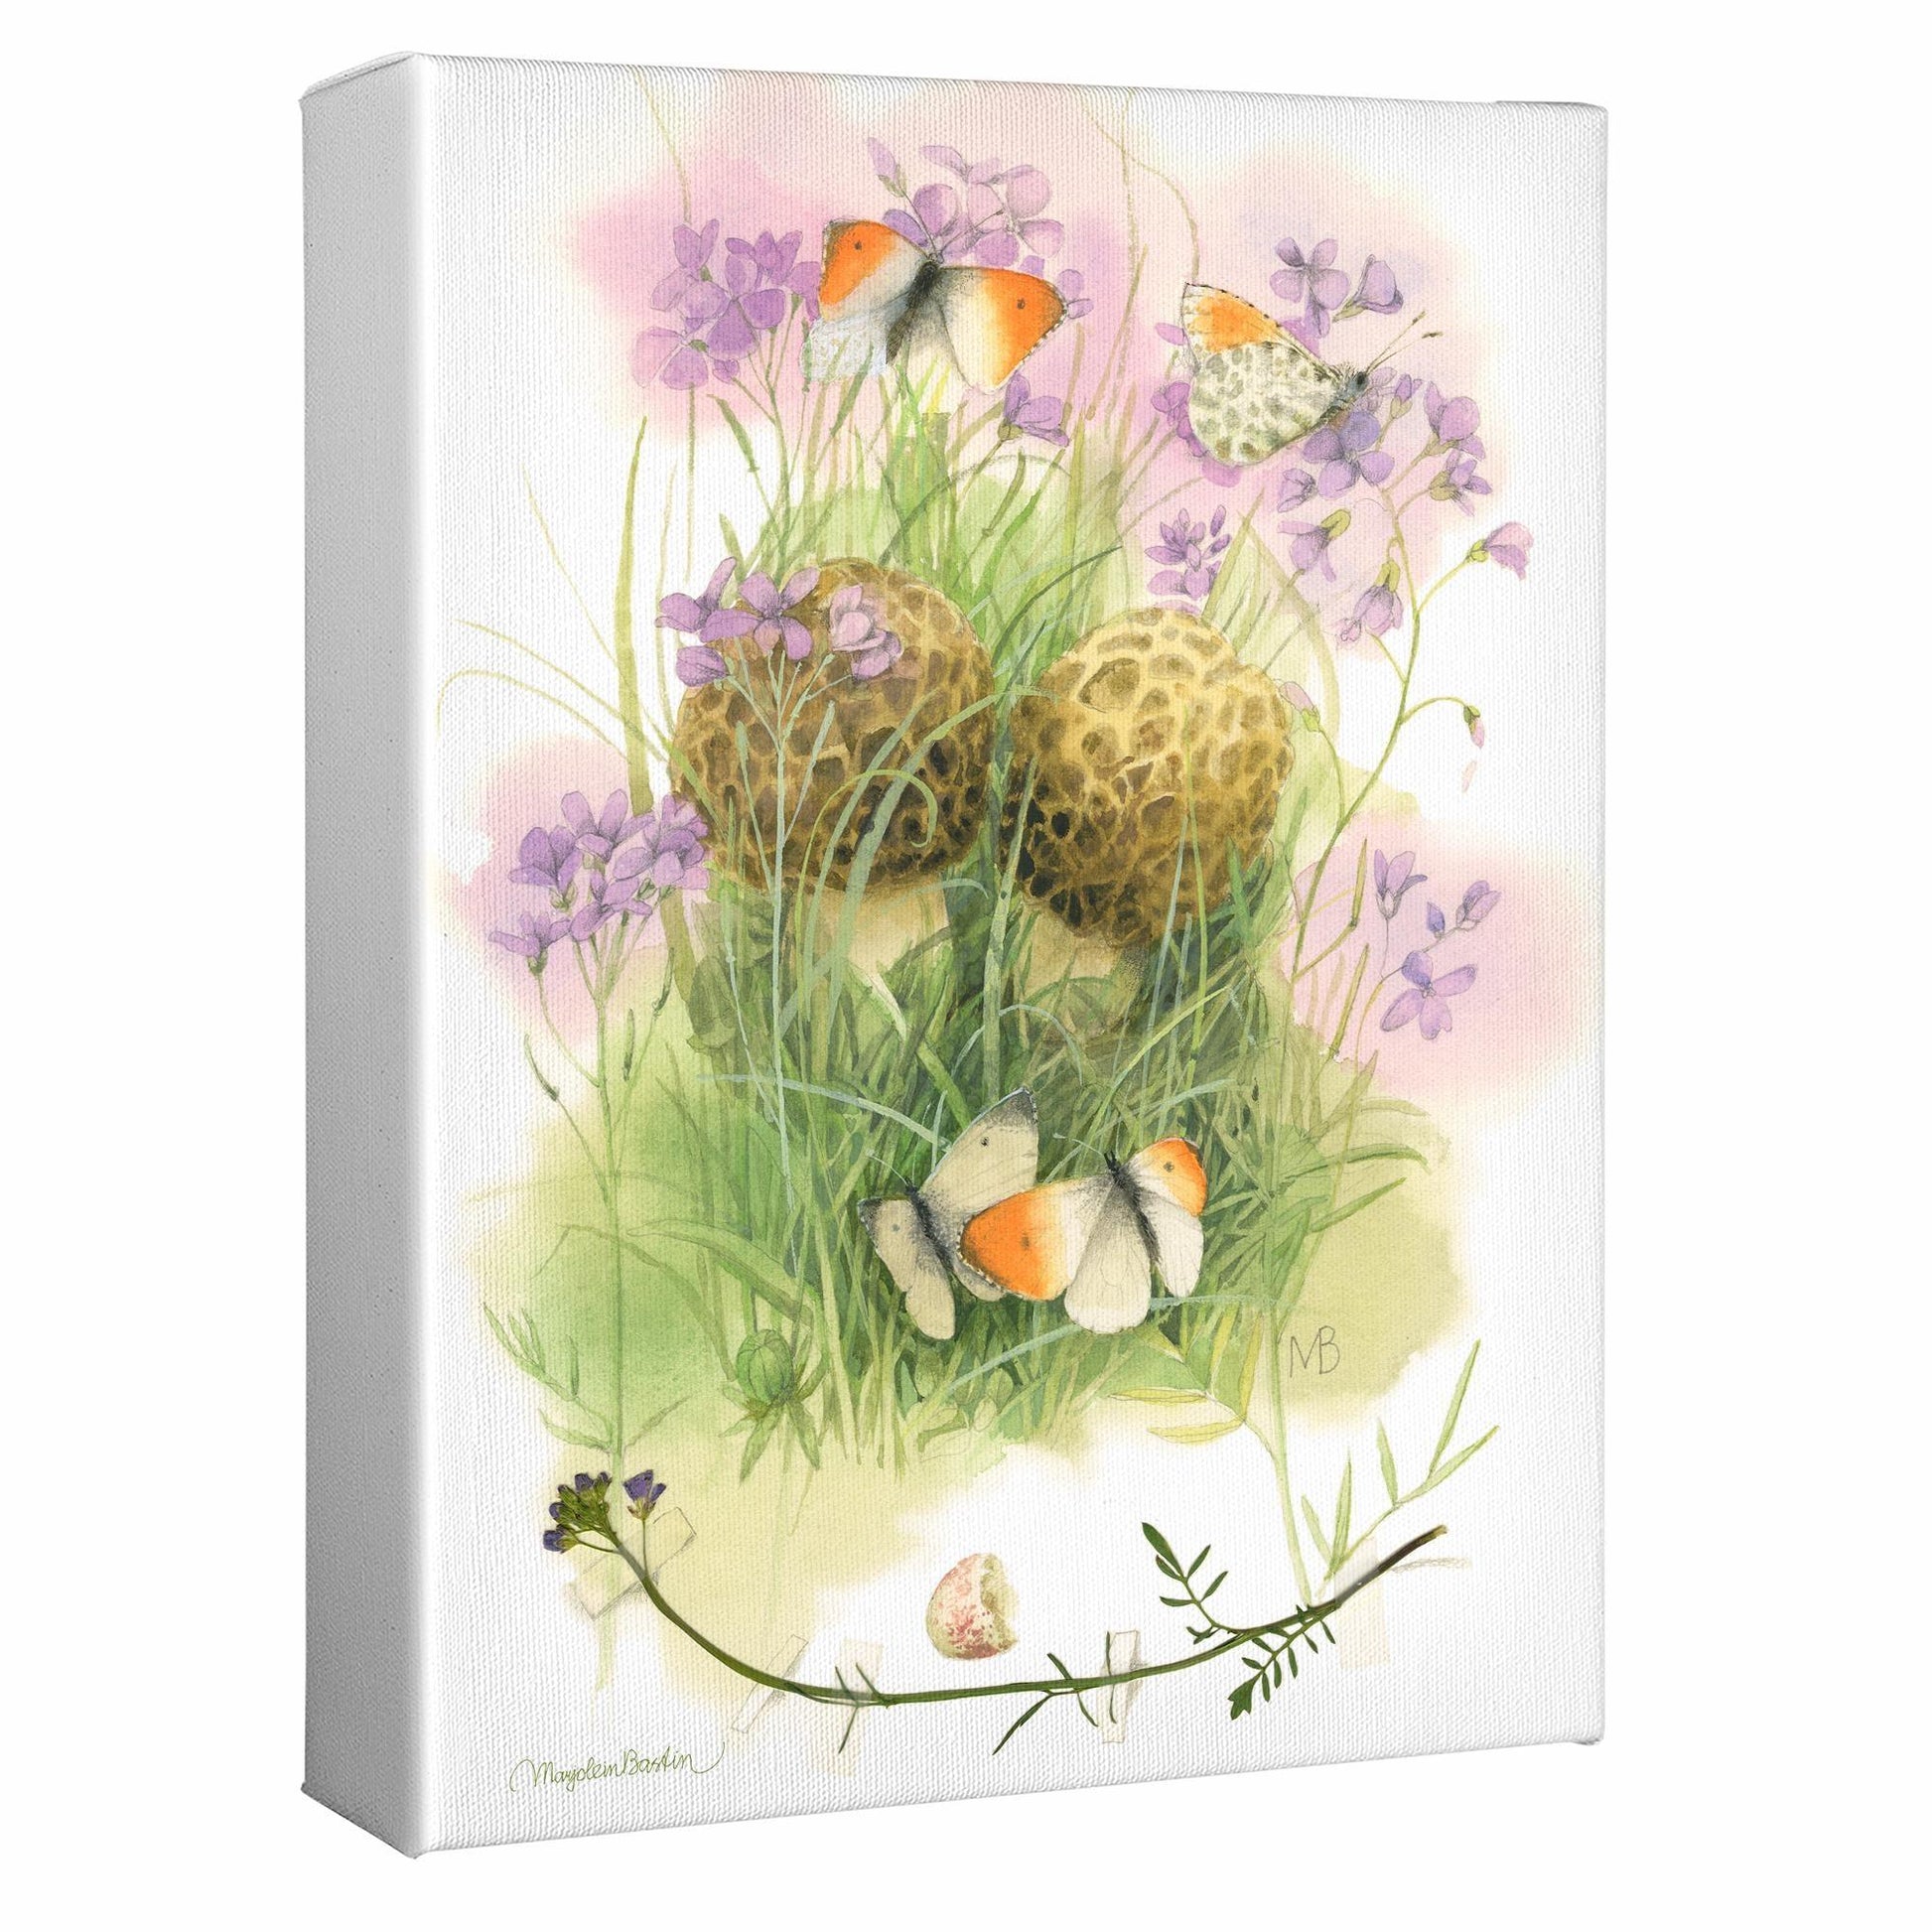 Memories Gallery Wrapped Canvas - Wild Wings